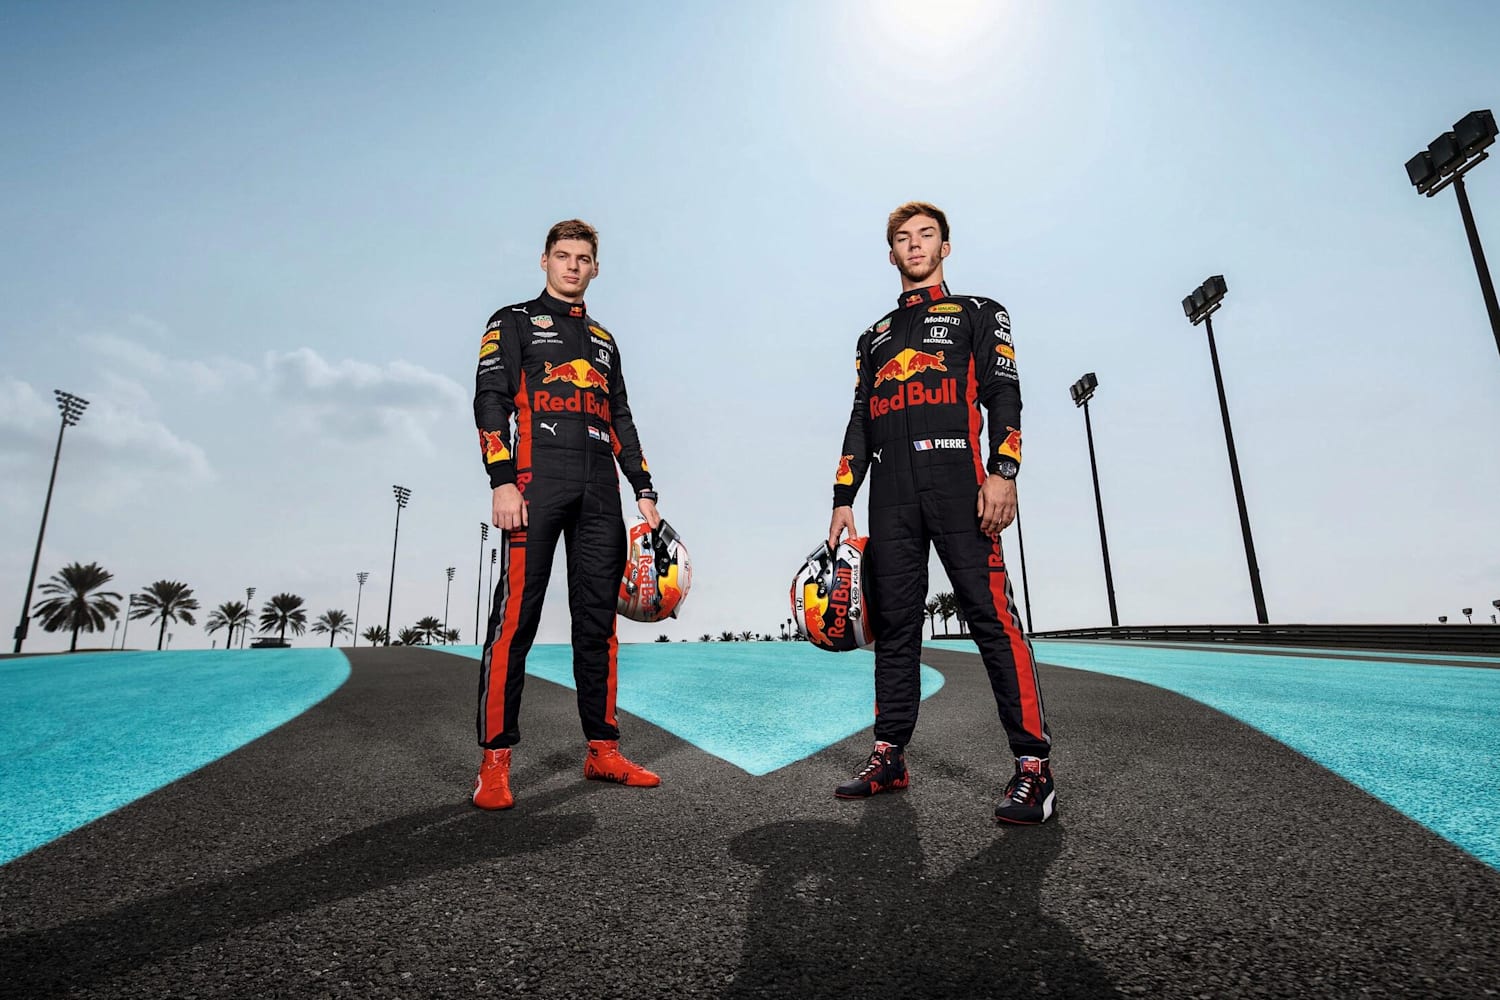 F1 teammate battles 2019: Who is the better F1 driver?